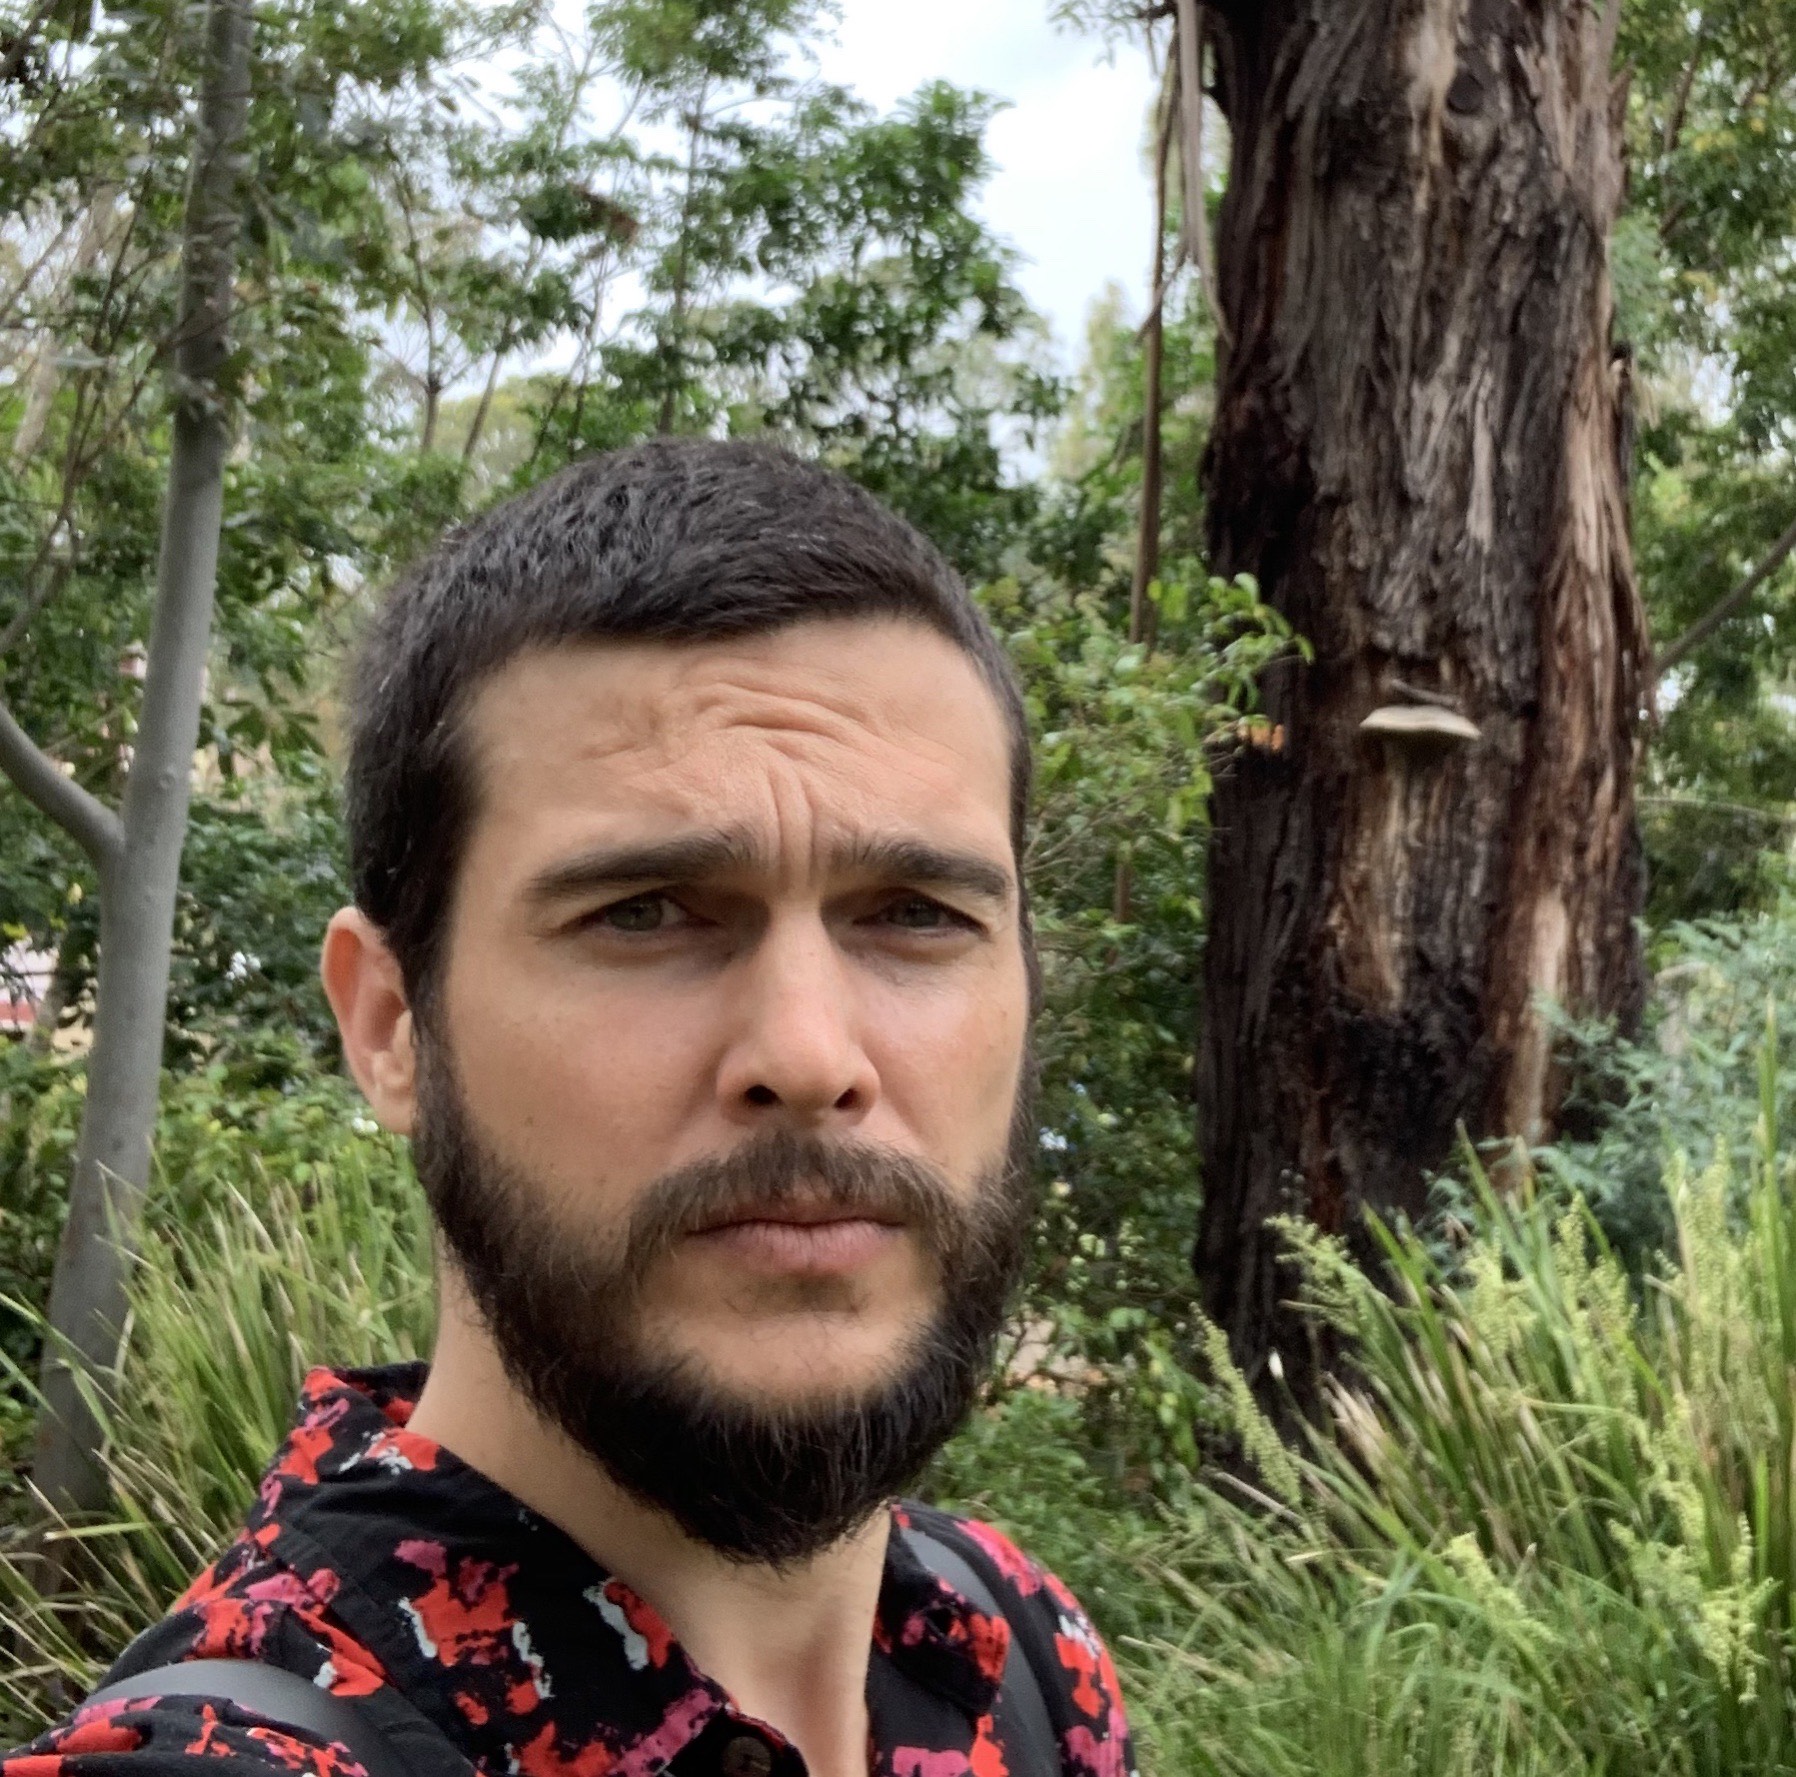 A headshot of the writer, Luke Patterson. Luke has brown hair and a brown beard and is wearing a black and read collared shirt. He is looking straight at the camera. He is surrounded by lush green forest.